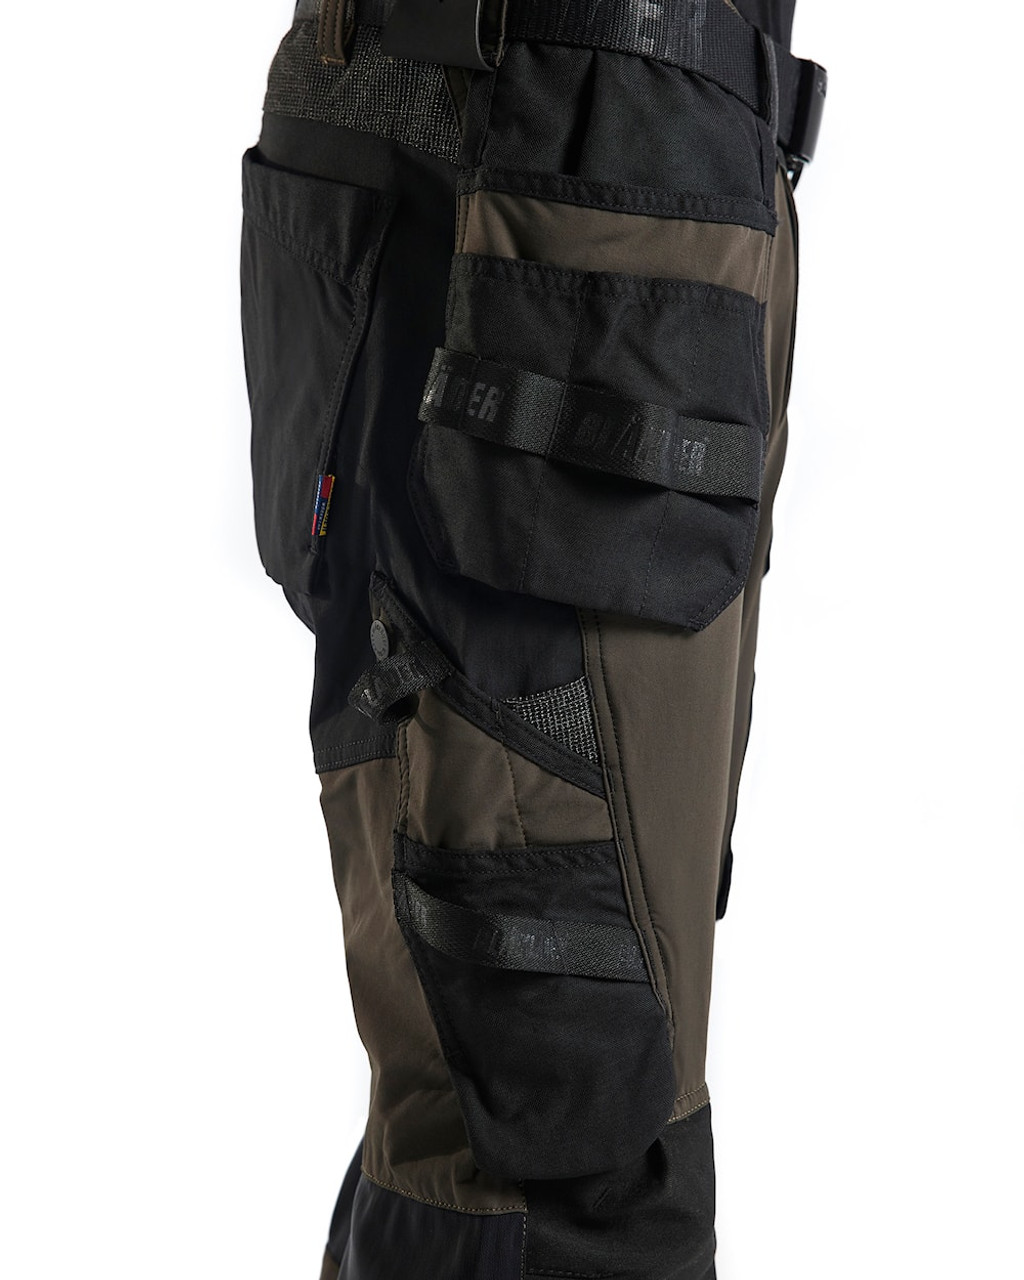 Craftsman Hardware supplies BLAKLADER Dark Grey Trousers with Holster Pockets for the Solar Industry and Installers in Glen Waverley, Bayswater and Mitcham